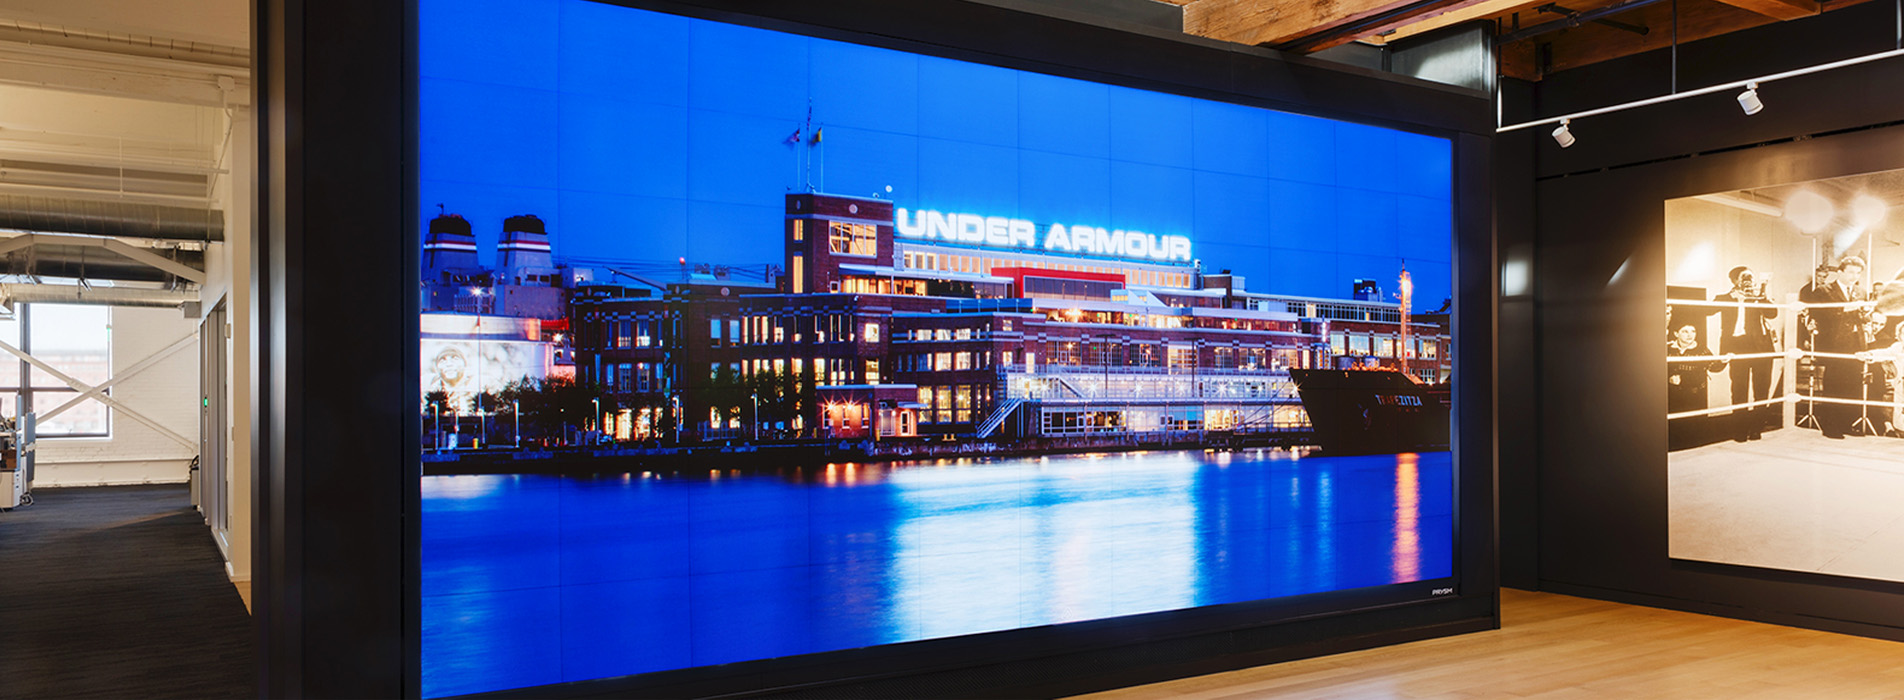 Active Led Displays- A video wall with superpowers!